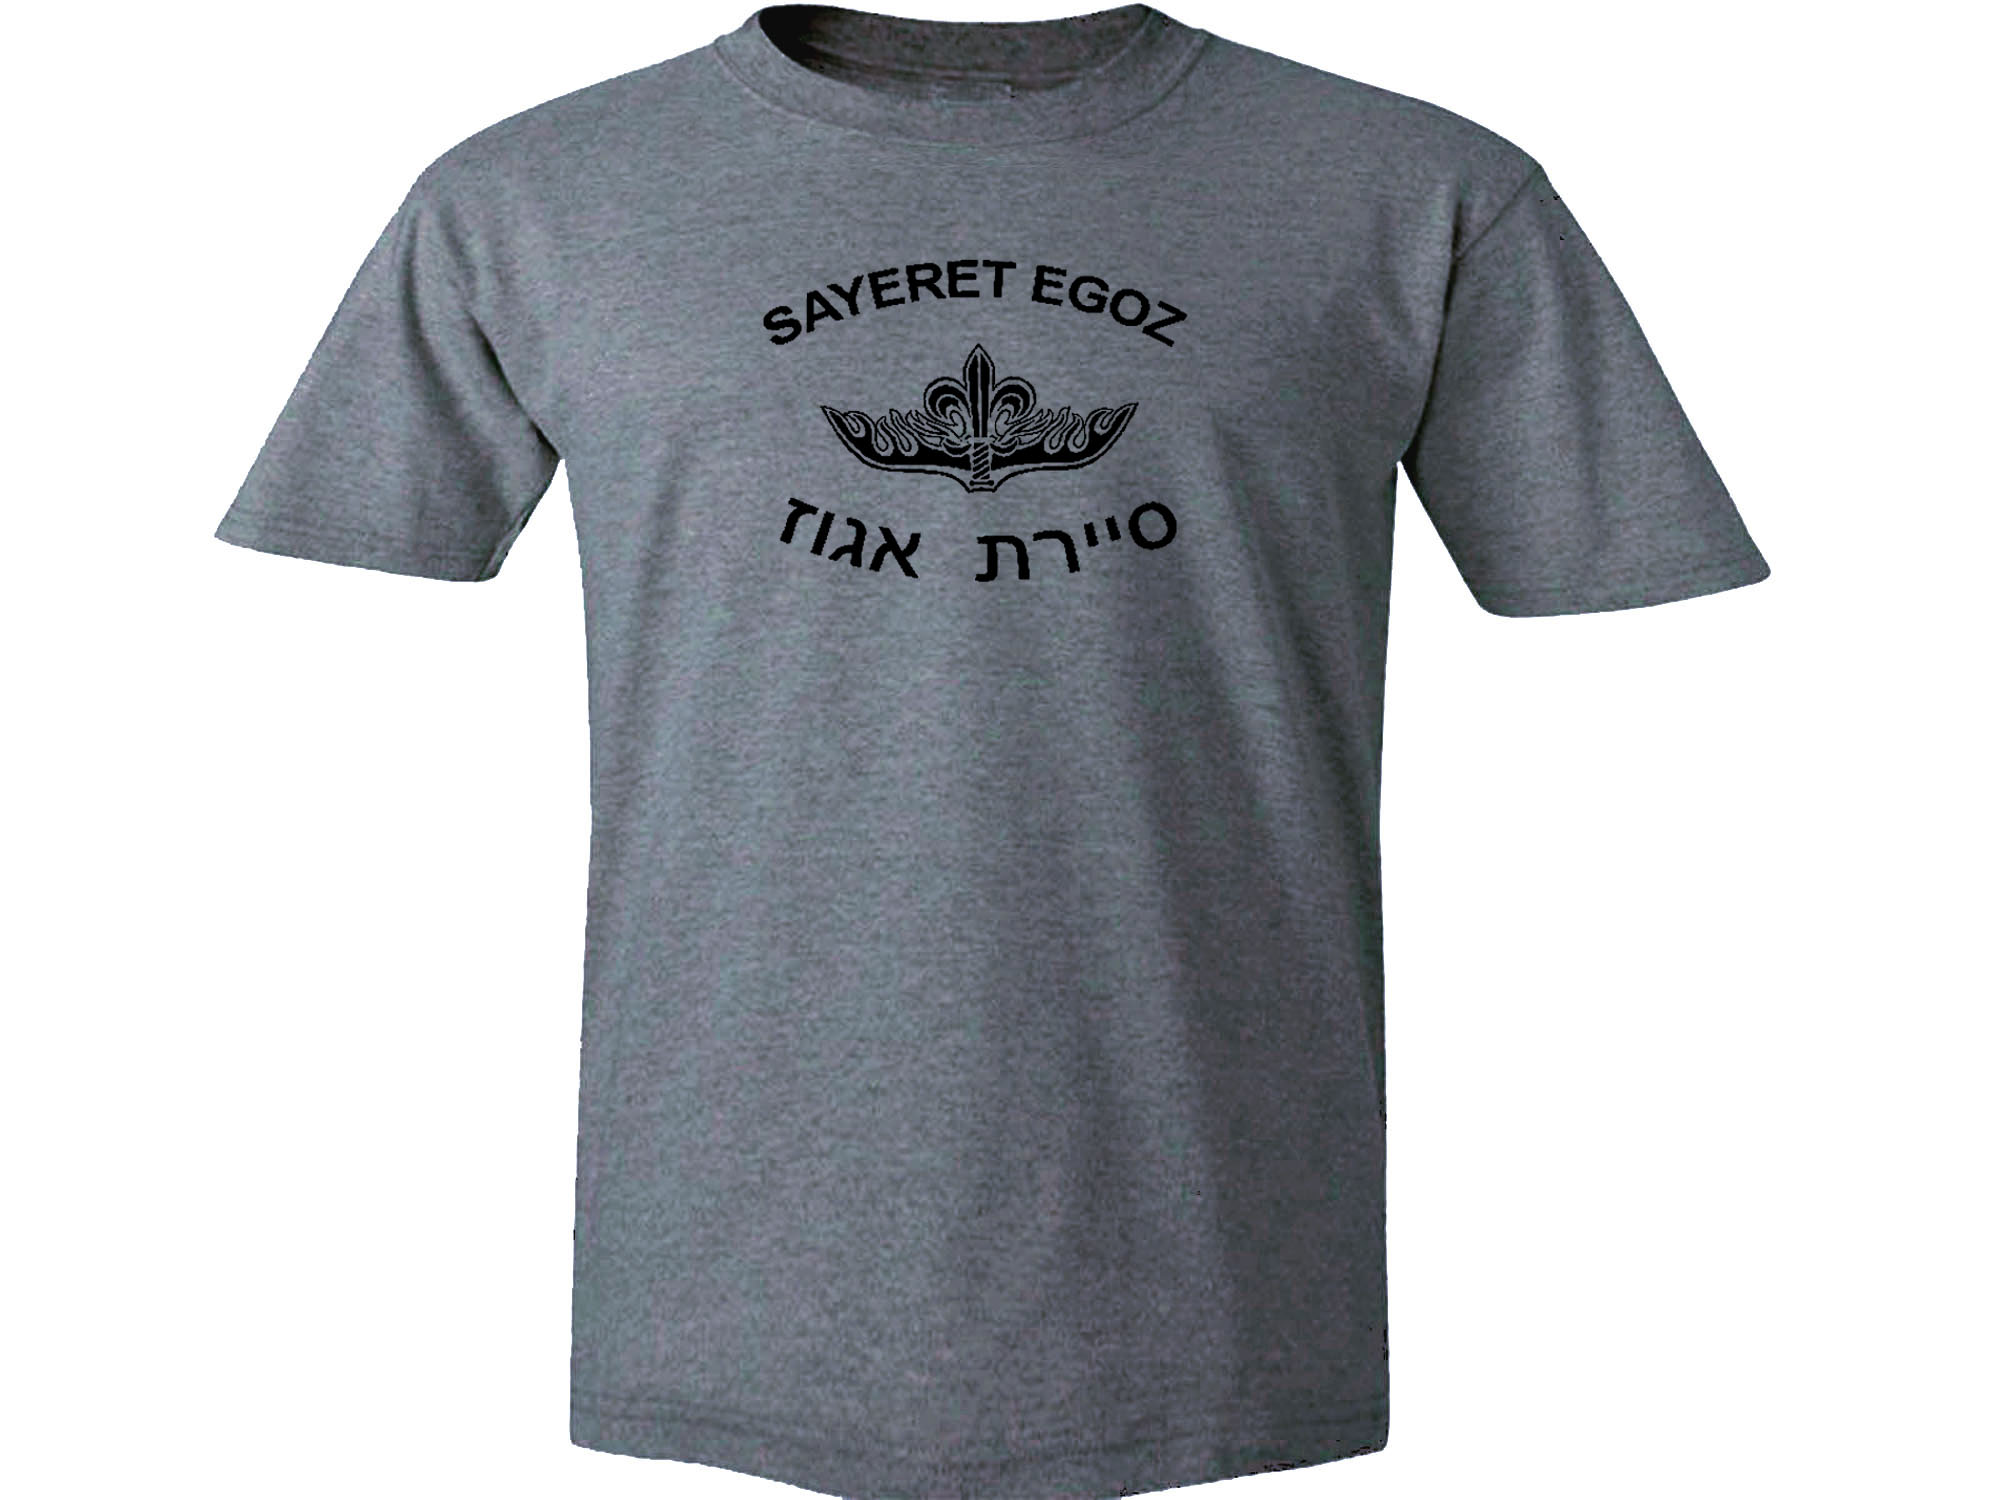 Israel army special forces Sayeret Egoz gray t-shirt 2